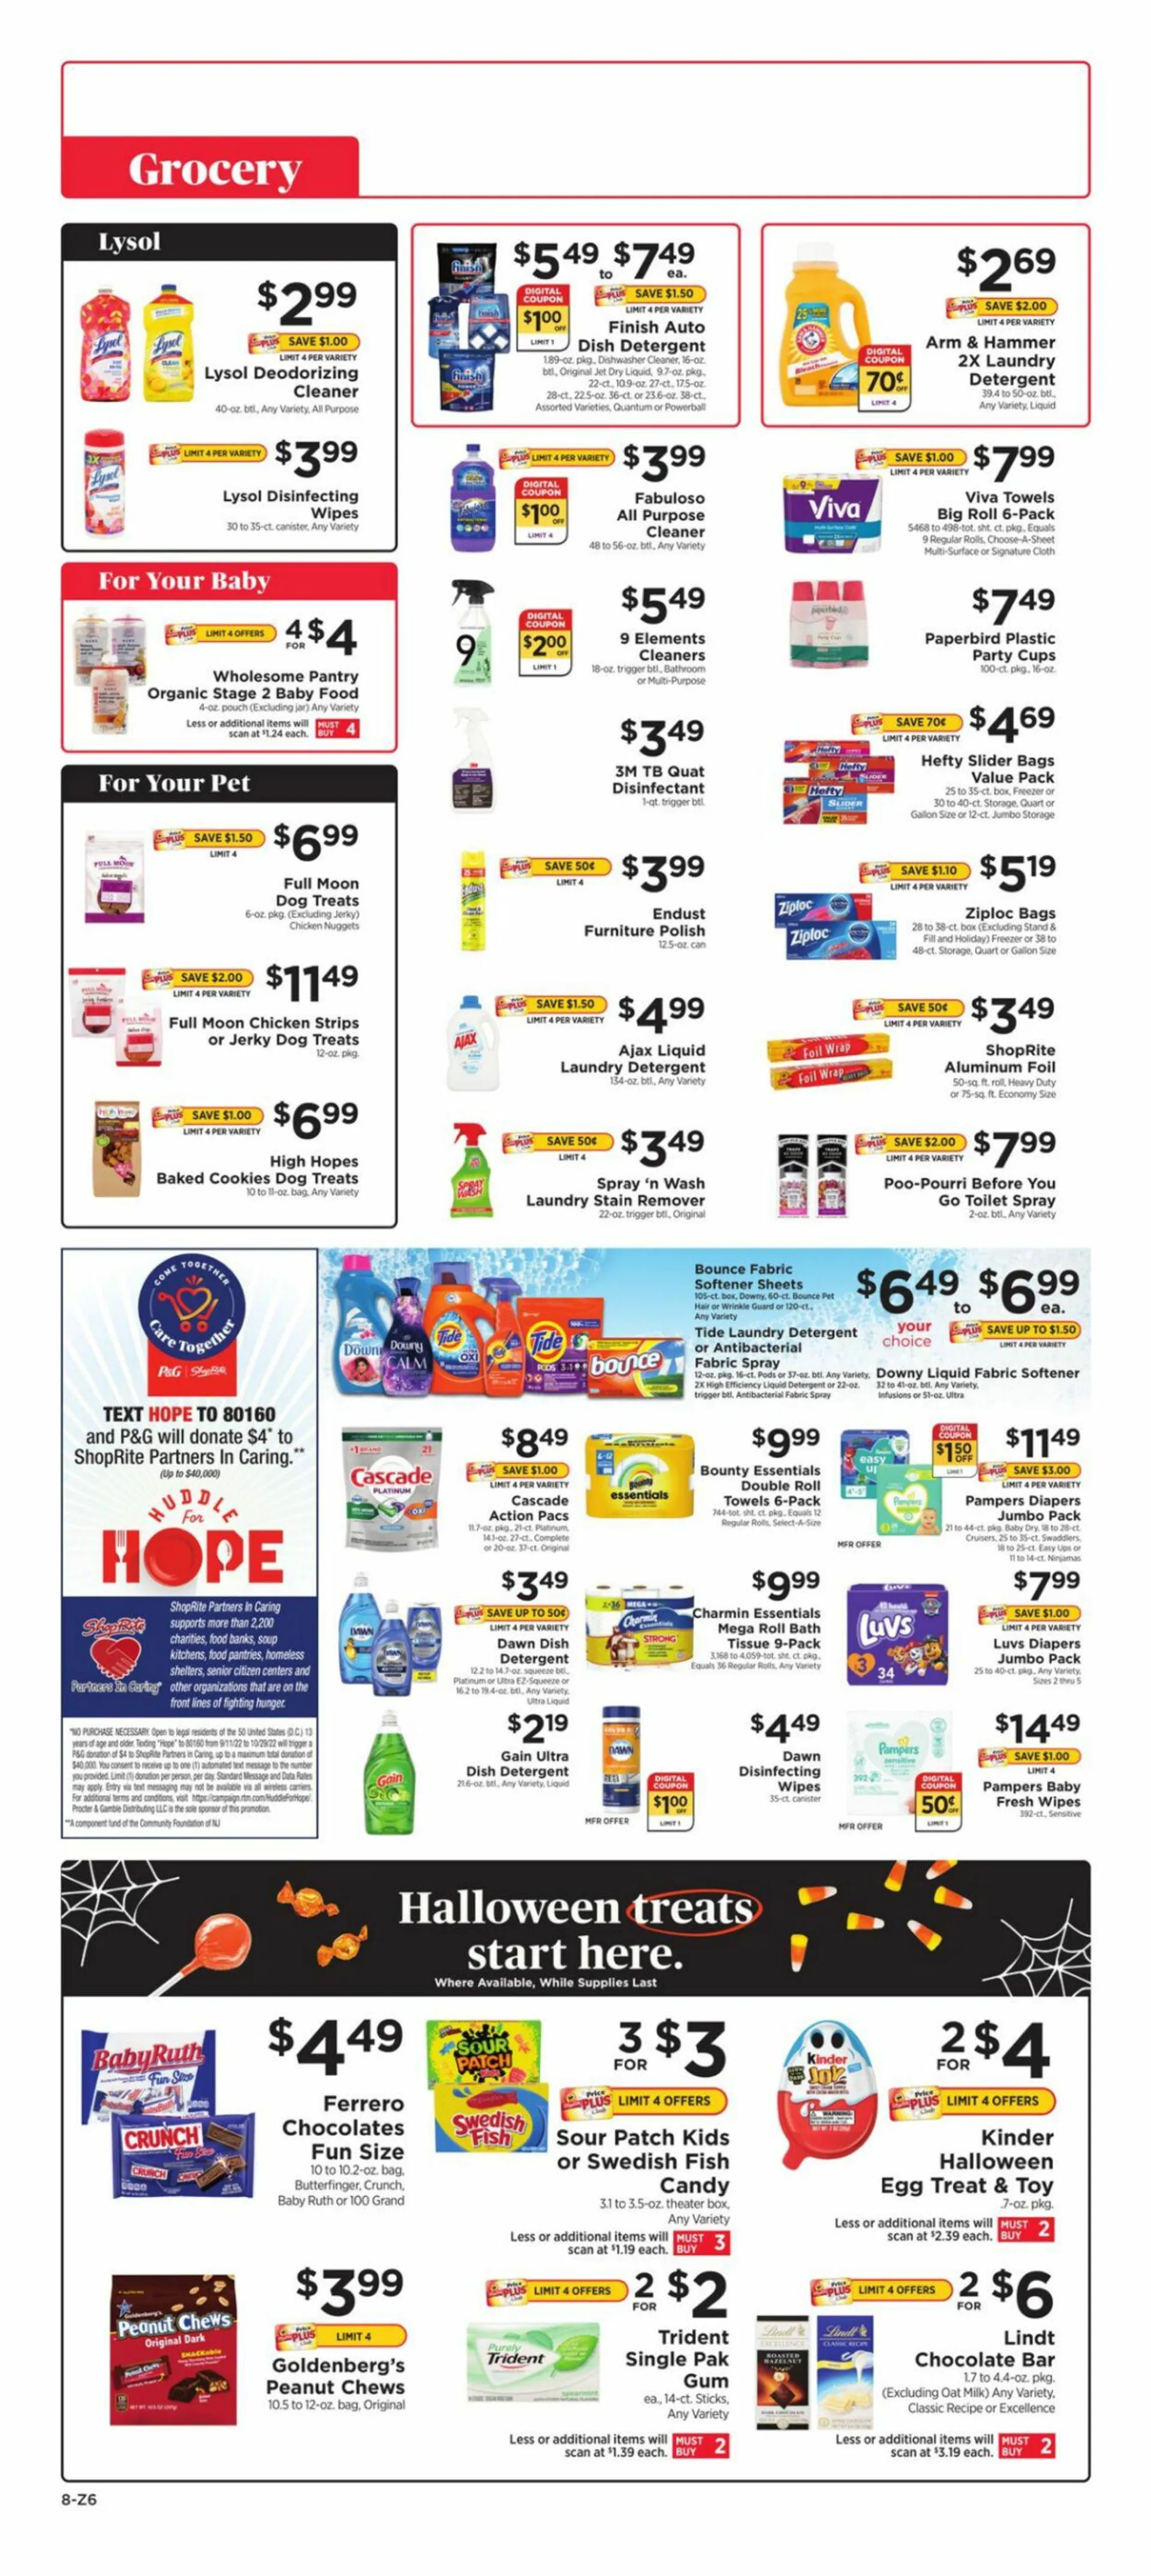 ShopRite Current weekly ad - 8